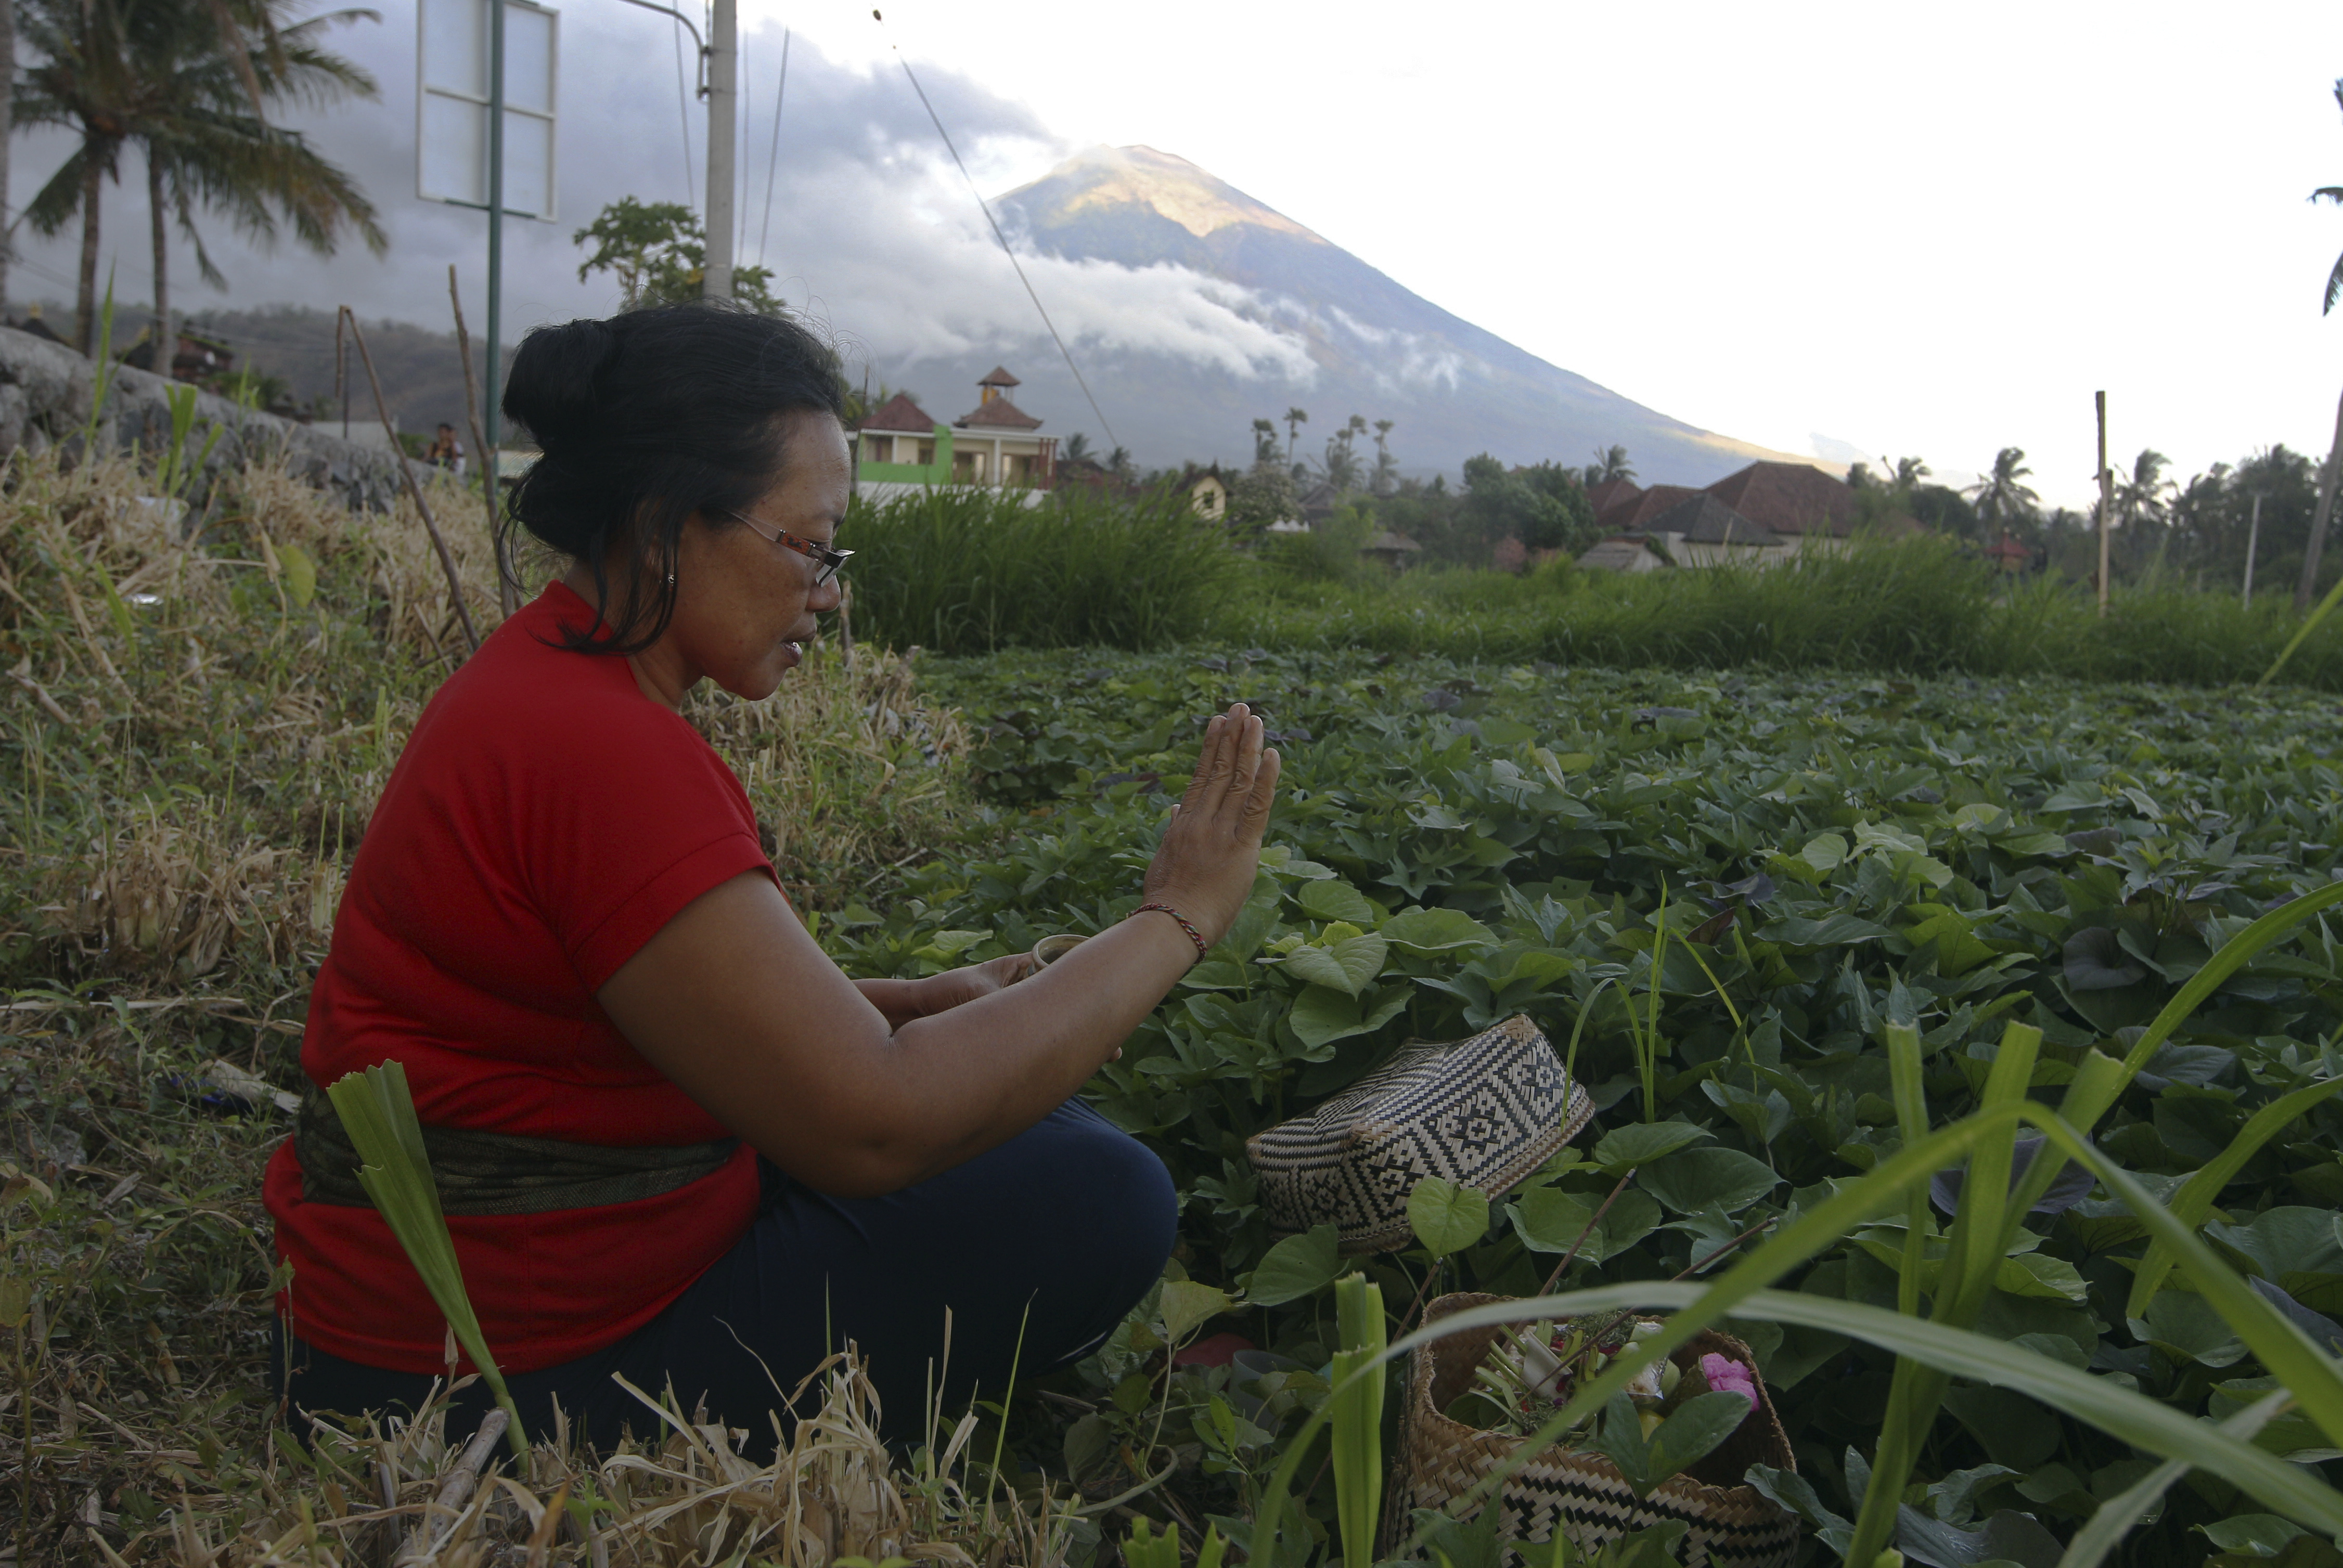 A woman prays at her plantation field with the Mount Agung volcano in the background in Karangasem, Bali, Indonesia, Saturday, Oct. 7, 2017. More than 140,000 people have fled from the surrounds of Mount Agung since authorities raised the volcano's alert status to the highest level on Sept. 22 after a sudden increase in tremors. It last erupted in 1963, killing more than 1,000 people. (AP Photo/Firdia Lisnawati)